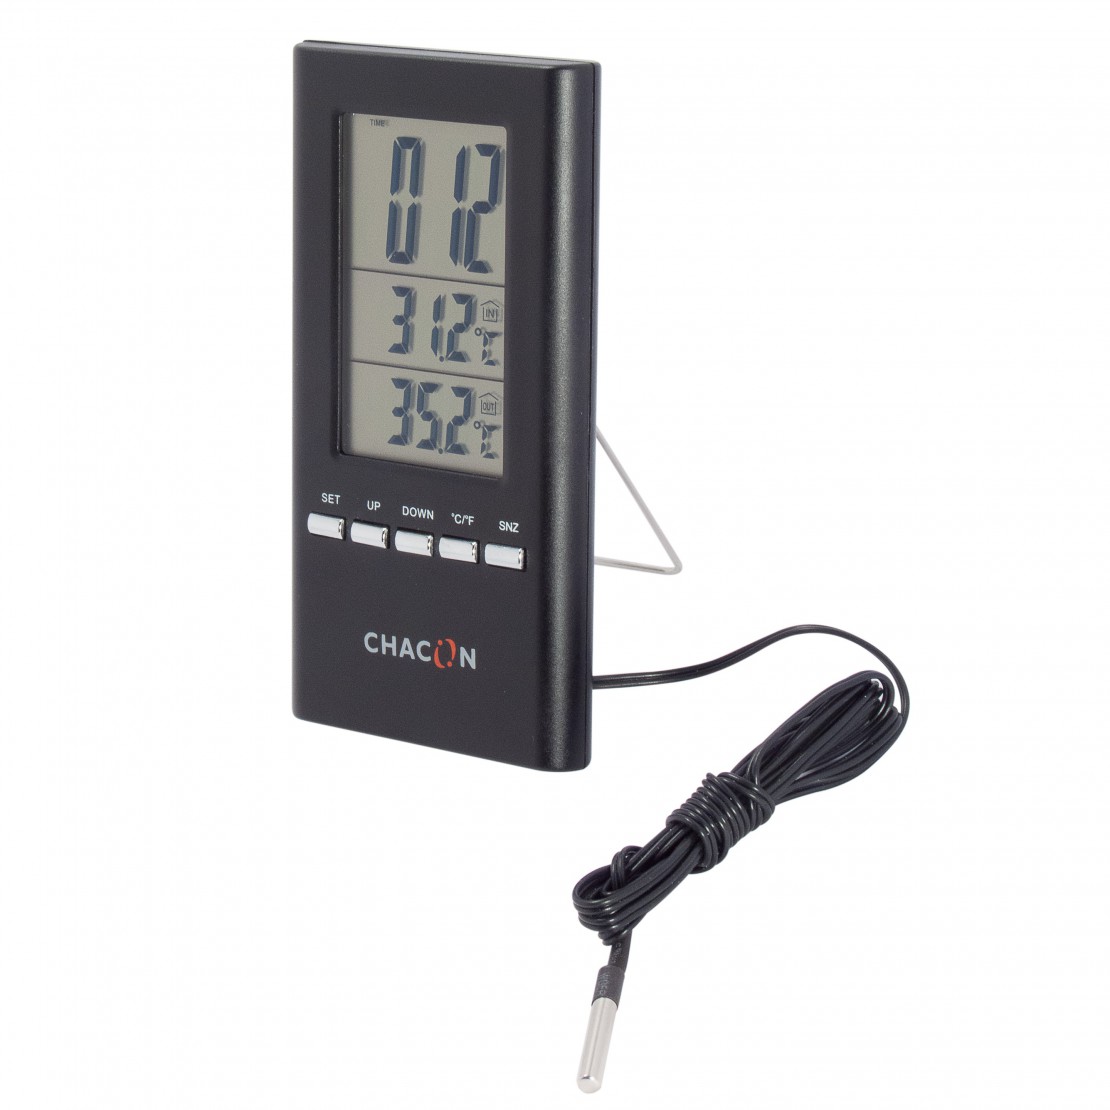 https://chacon.com/9081-large_default/wired-inside-outside-thermometer.jpg